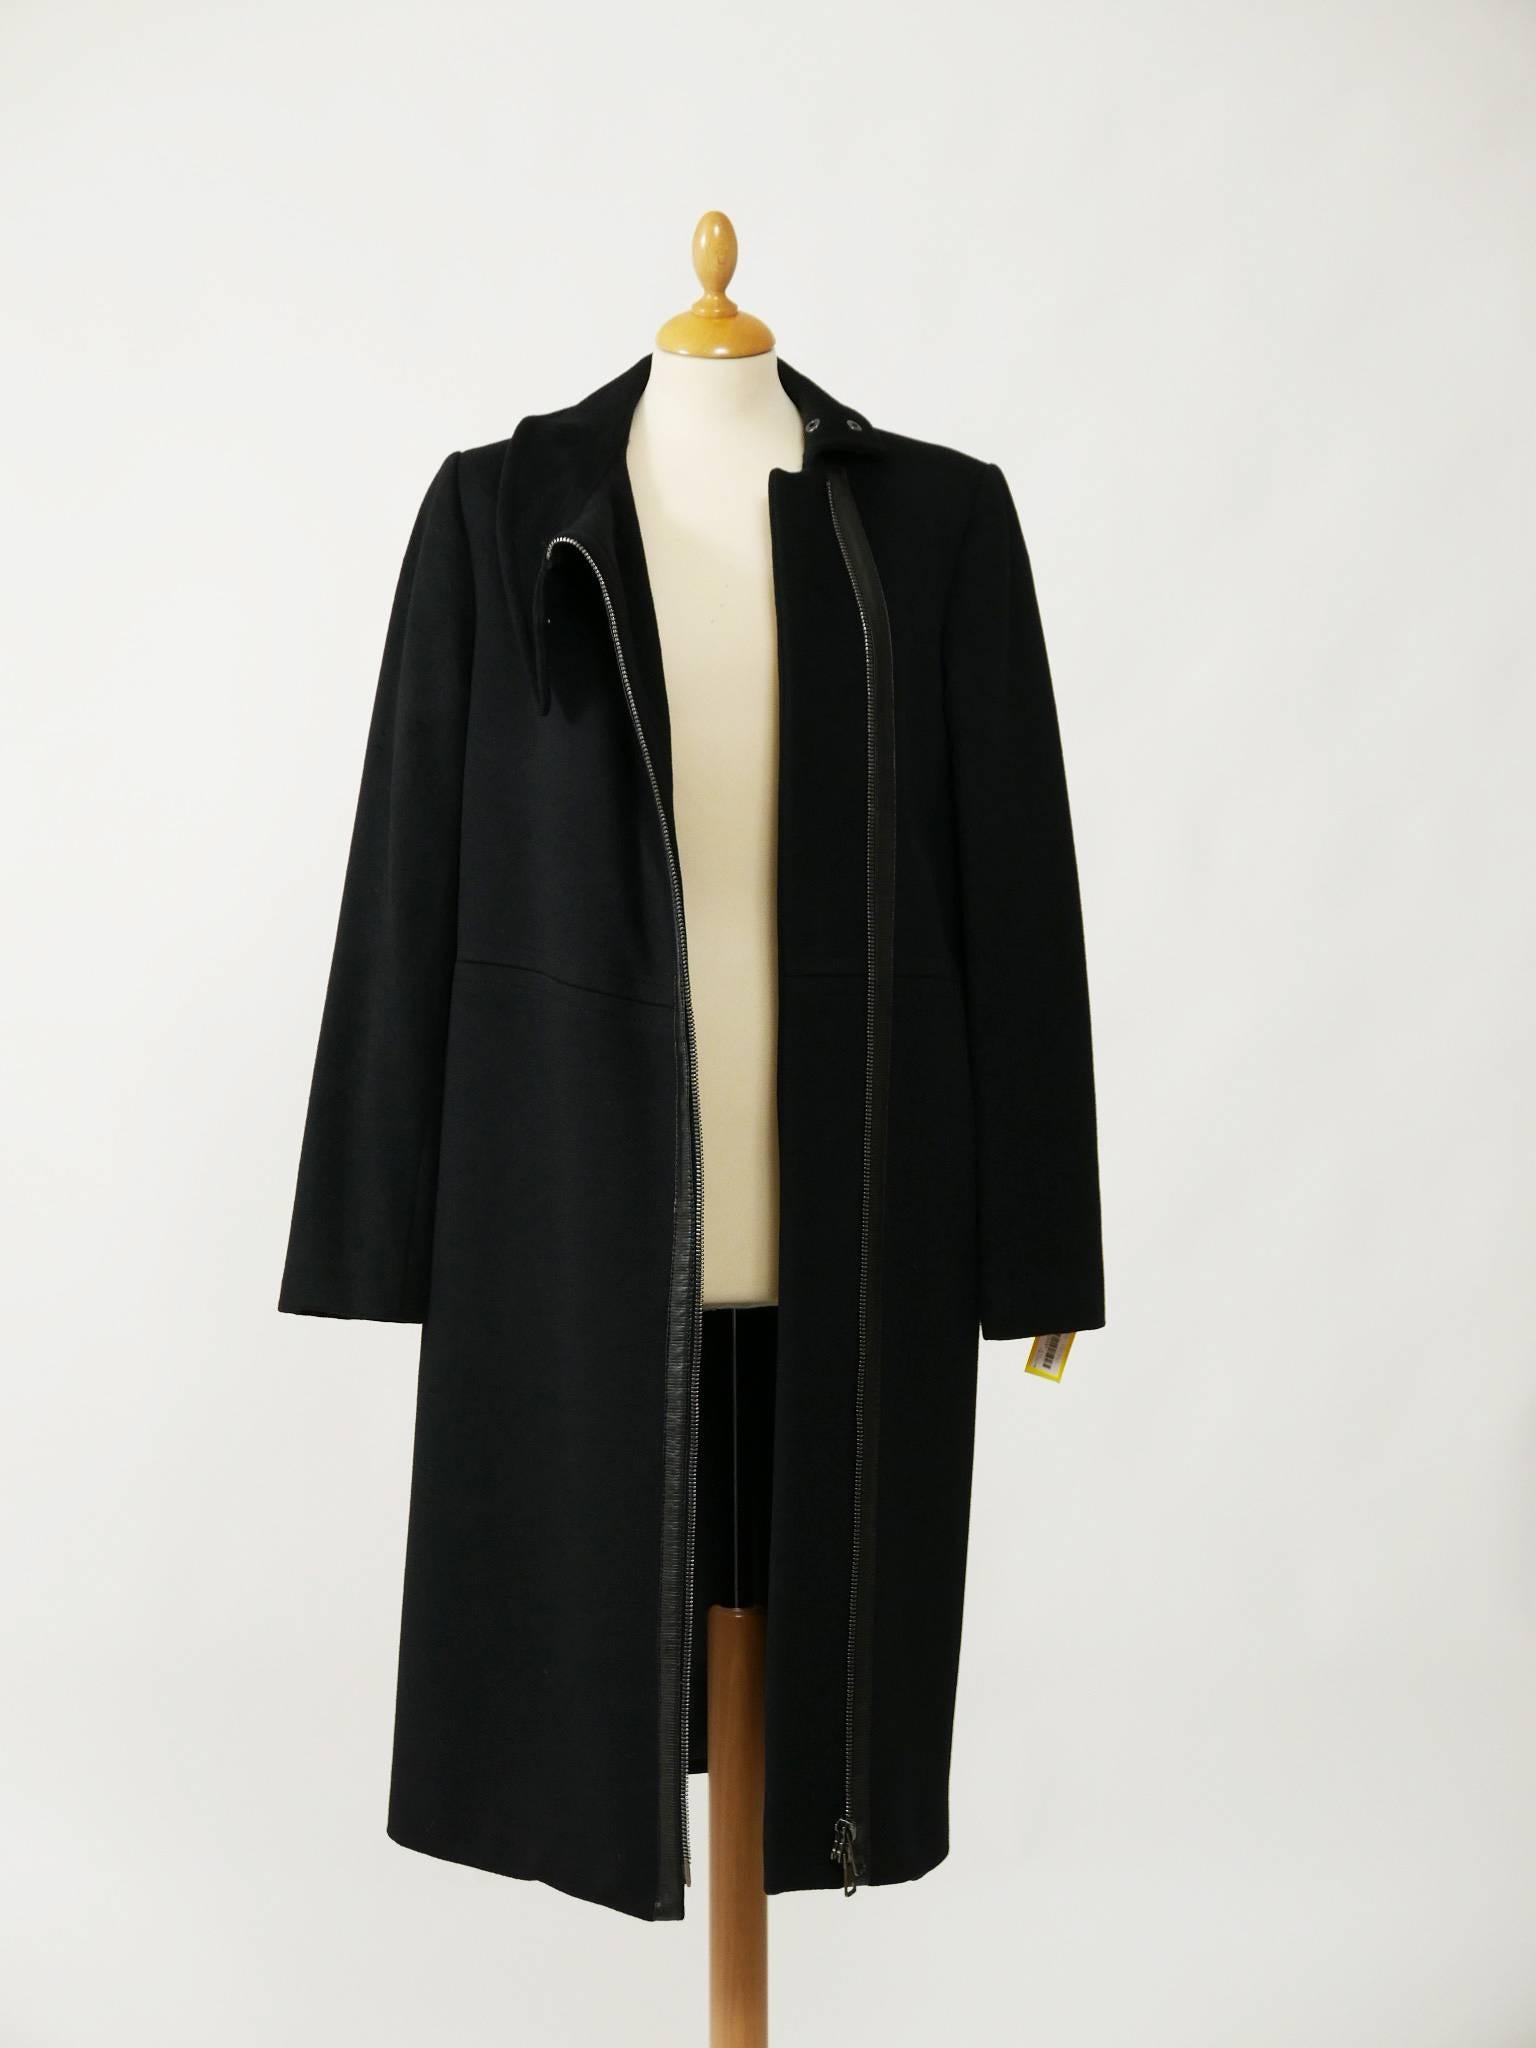 Gucci Made in Italy Black Wool Coat 5